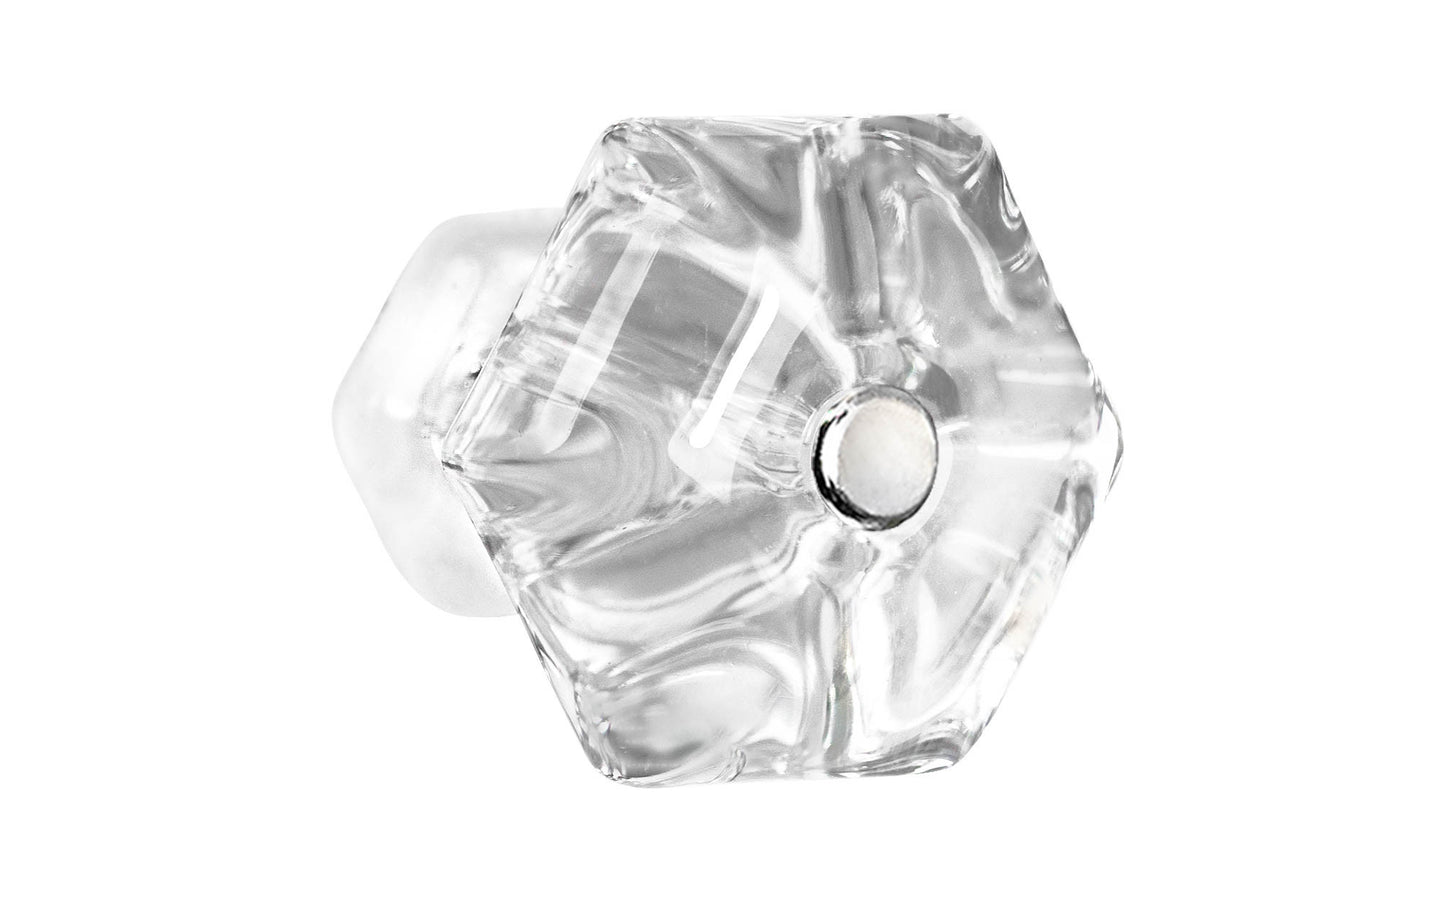 Vintage-style Hardware · Classic & original-style hexagonal glass cabinet knob with a silver pan head thru-bolt. Made of genuine glass. Crystal clear glass. Includes a silver pan thru-bolt. Reproduction hexagonal classic glass knob. Traditional hex glass knob. 1-3/4" Diameter